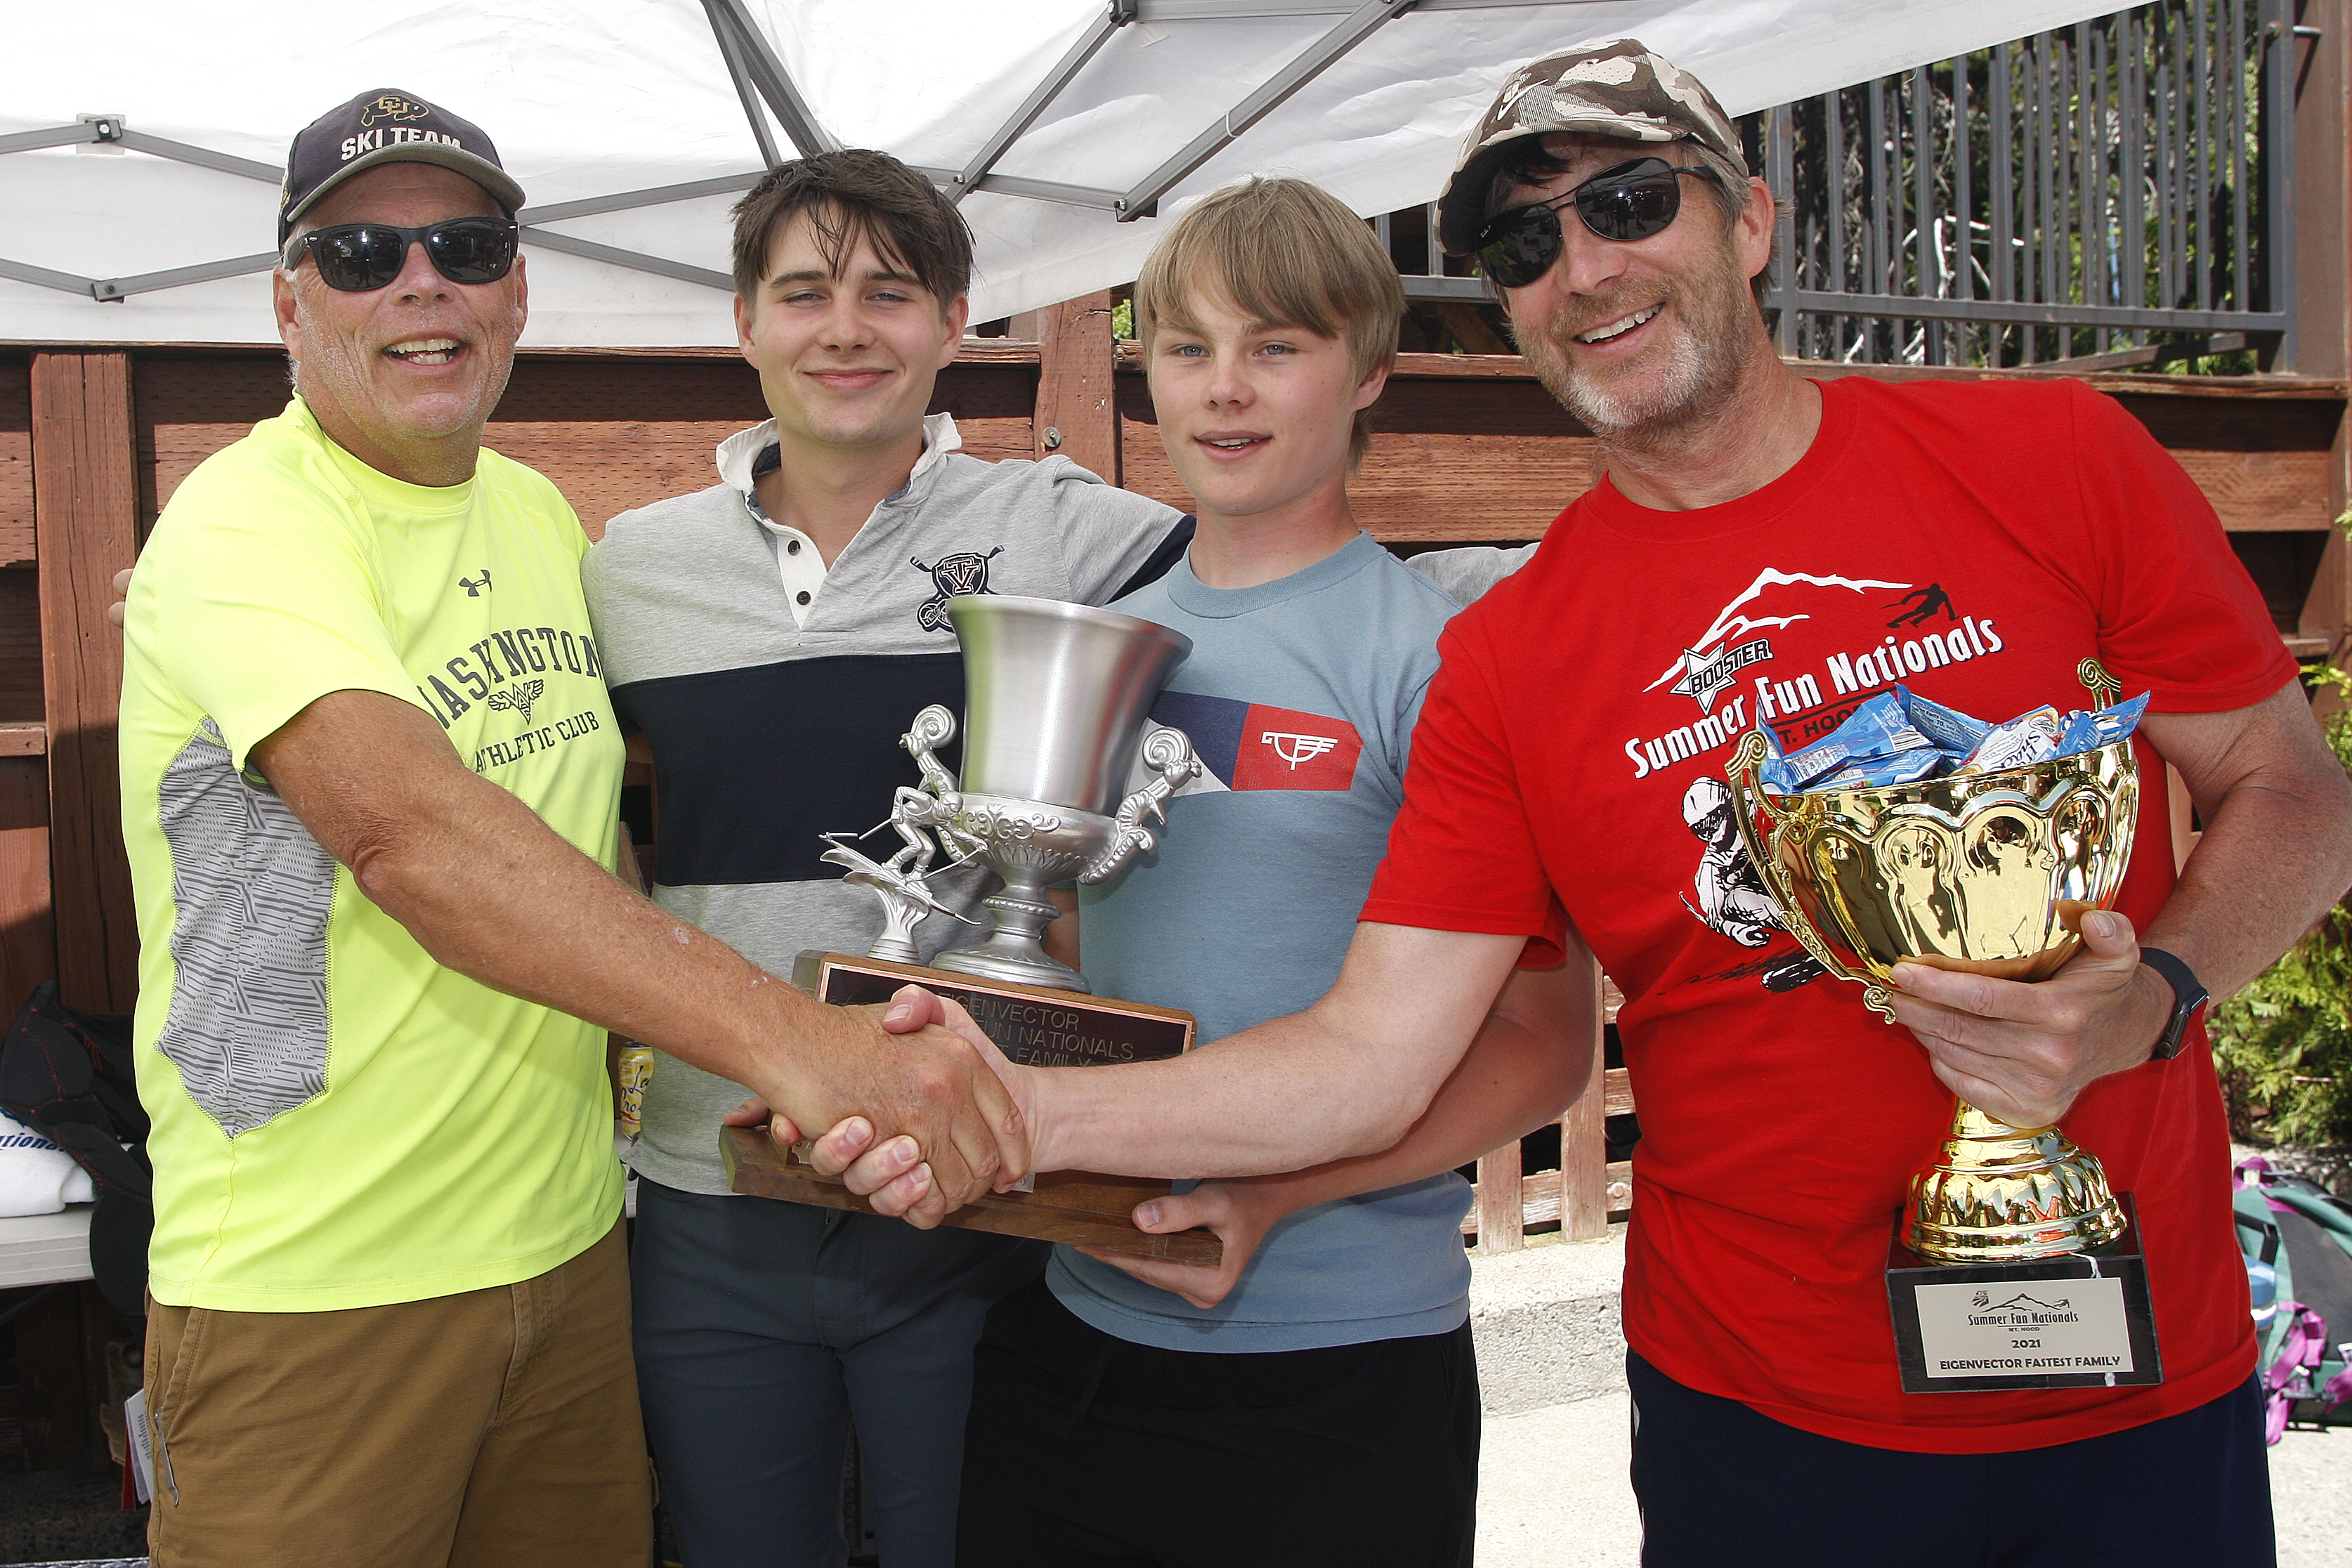 2021 Summer Fun Nationals Eigenvector Fastest Family Award - Anderson Family